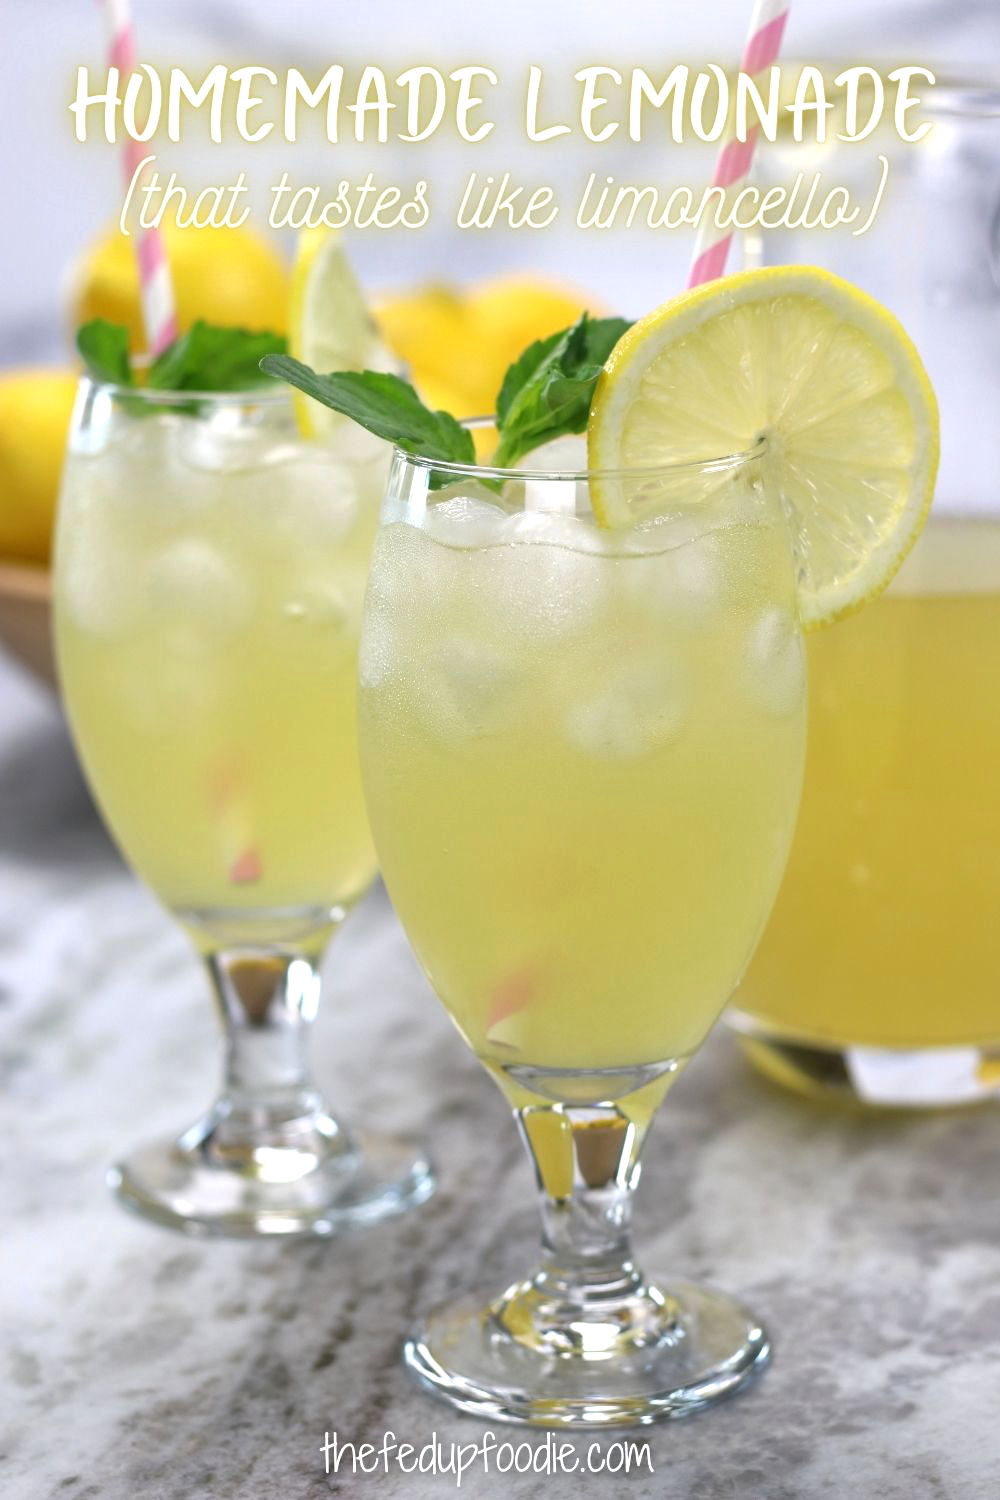 How to make the Best Lemonade that tastes like seductive limoncello but without the alcohol. With a kiss of fresh mint, this lemonade recipe is not overly tart and is immensely refreshing. Pure bliss for lemon lovers on a hot summer's day. 
#Lemonade #LemonadeRecipe #HomemadeLemonade #HowToMakeHomemadeLemonade #BestHomemadeLemonade #MintLemonadeRecipe #LemonadeRecipeWithLemonPeel